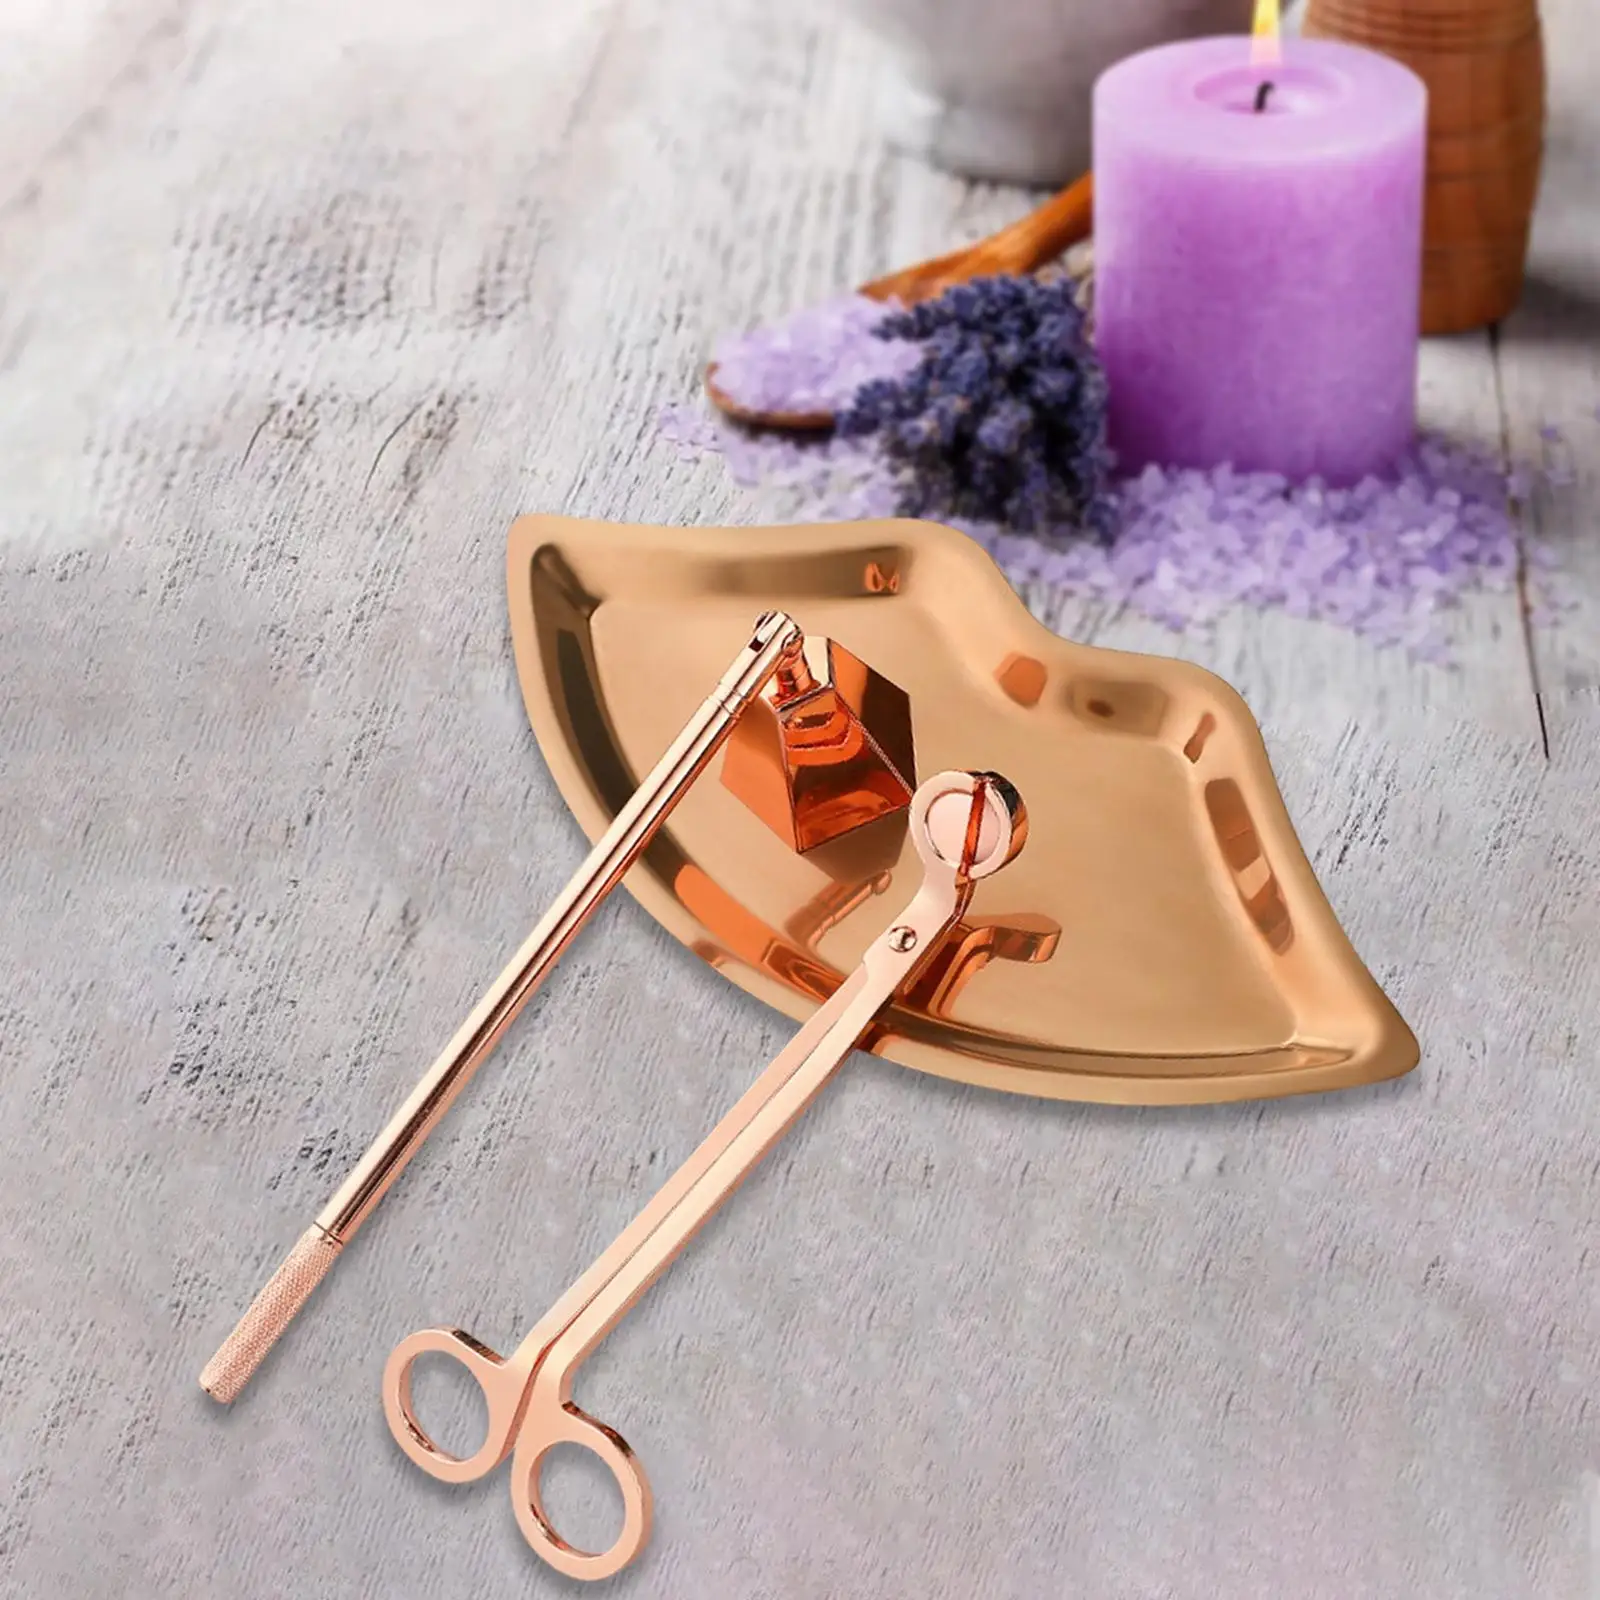 3 in 1 Candle Accessory Set Wick Trimmer Wick Flame Snuffer Candle Extinguisher Set Tray for Christmas Thanksgiving Jar Candles